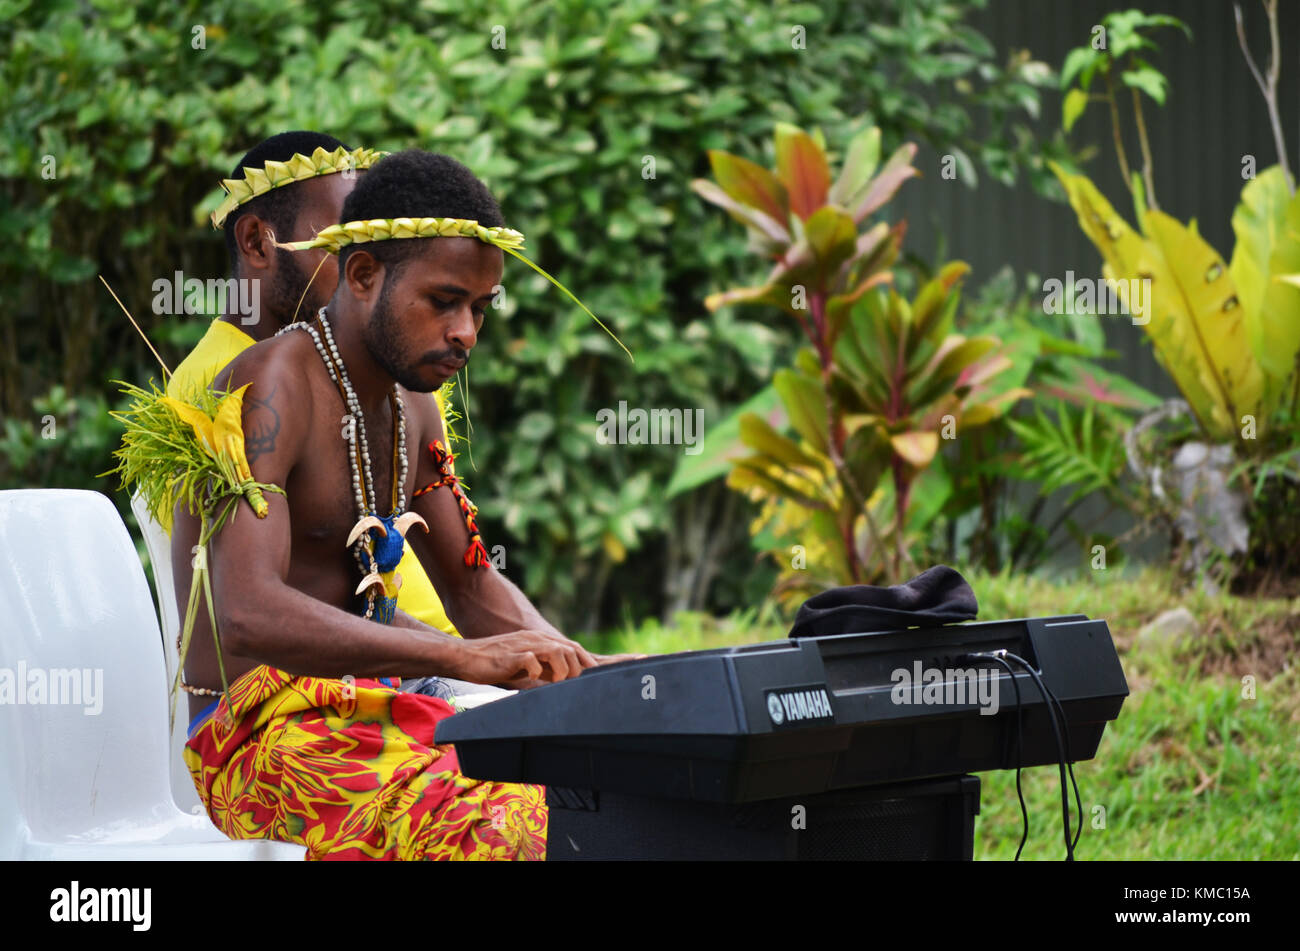 Islanders singing and playing musical instruments taken at Papua New Guinea Stock Photo